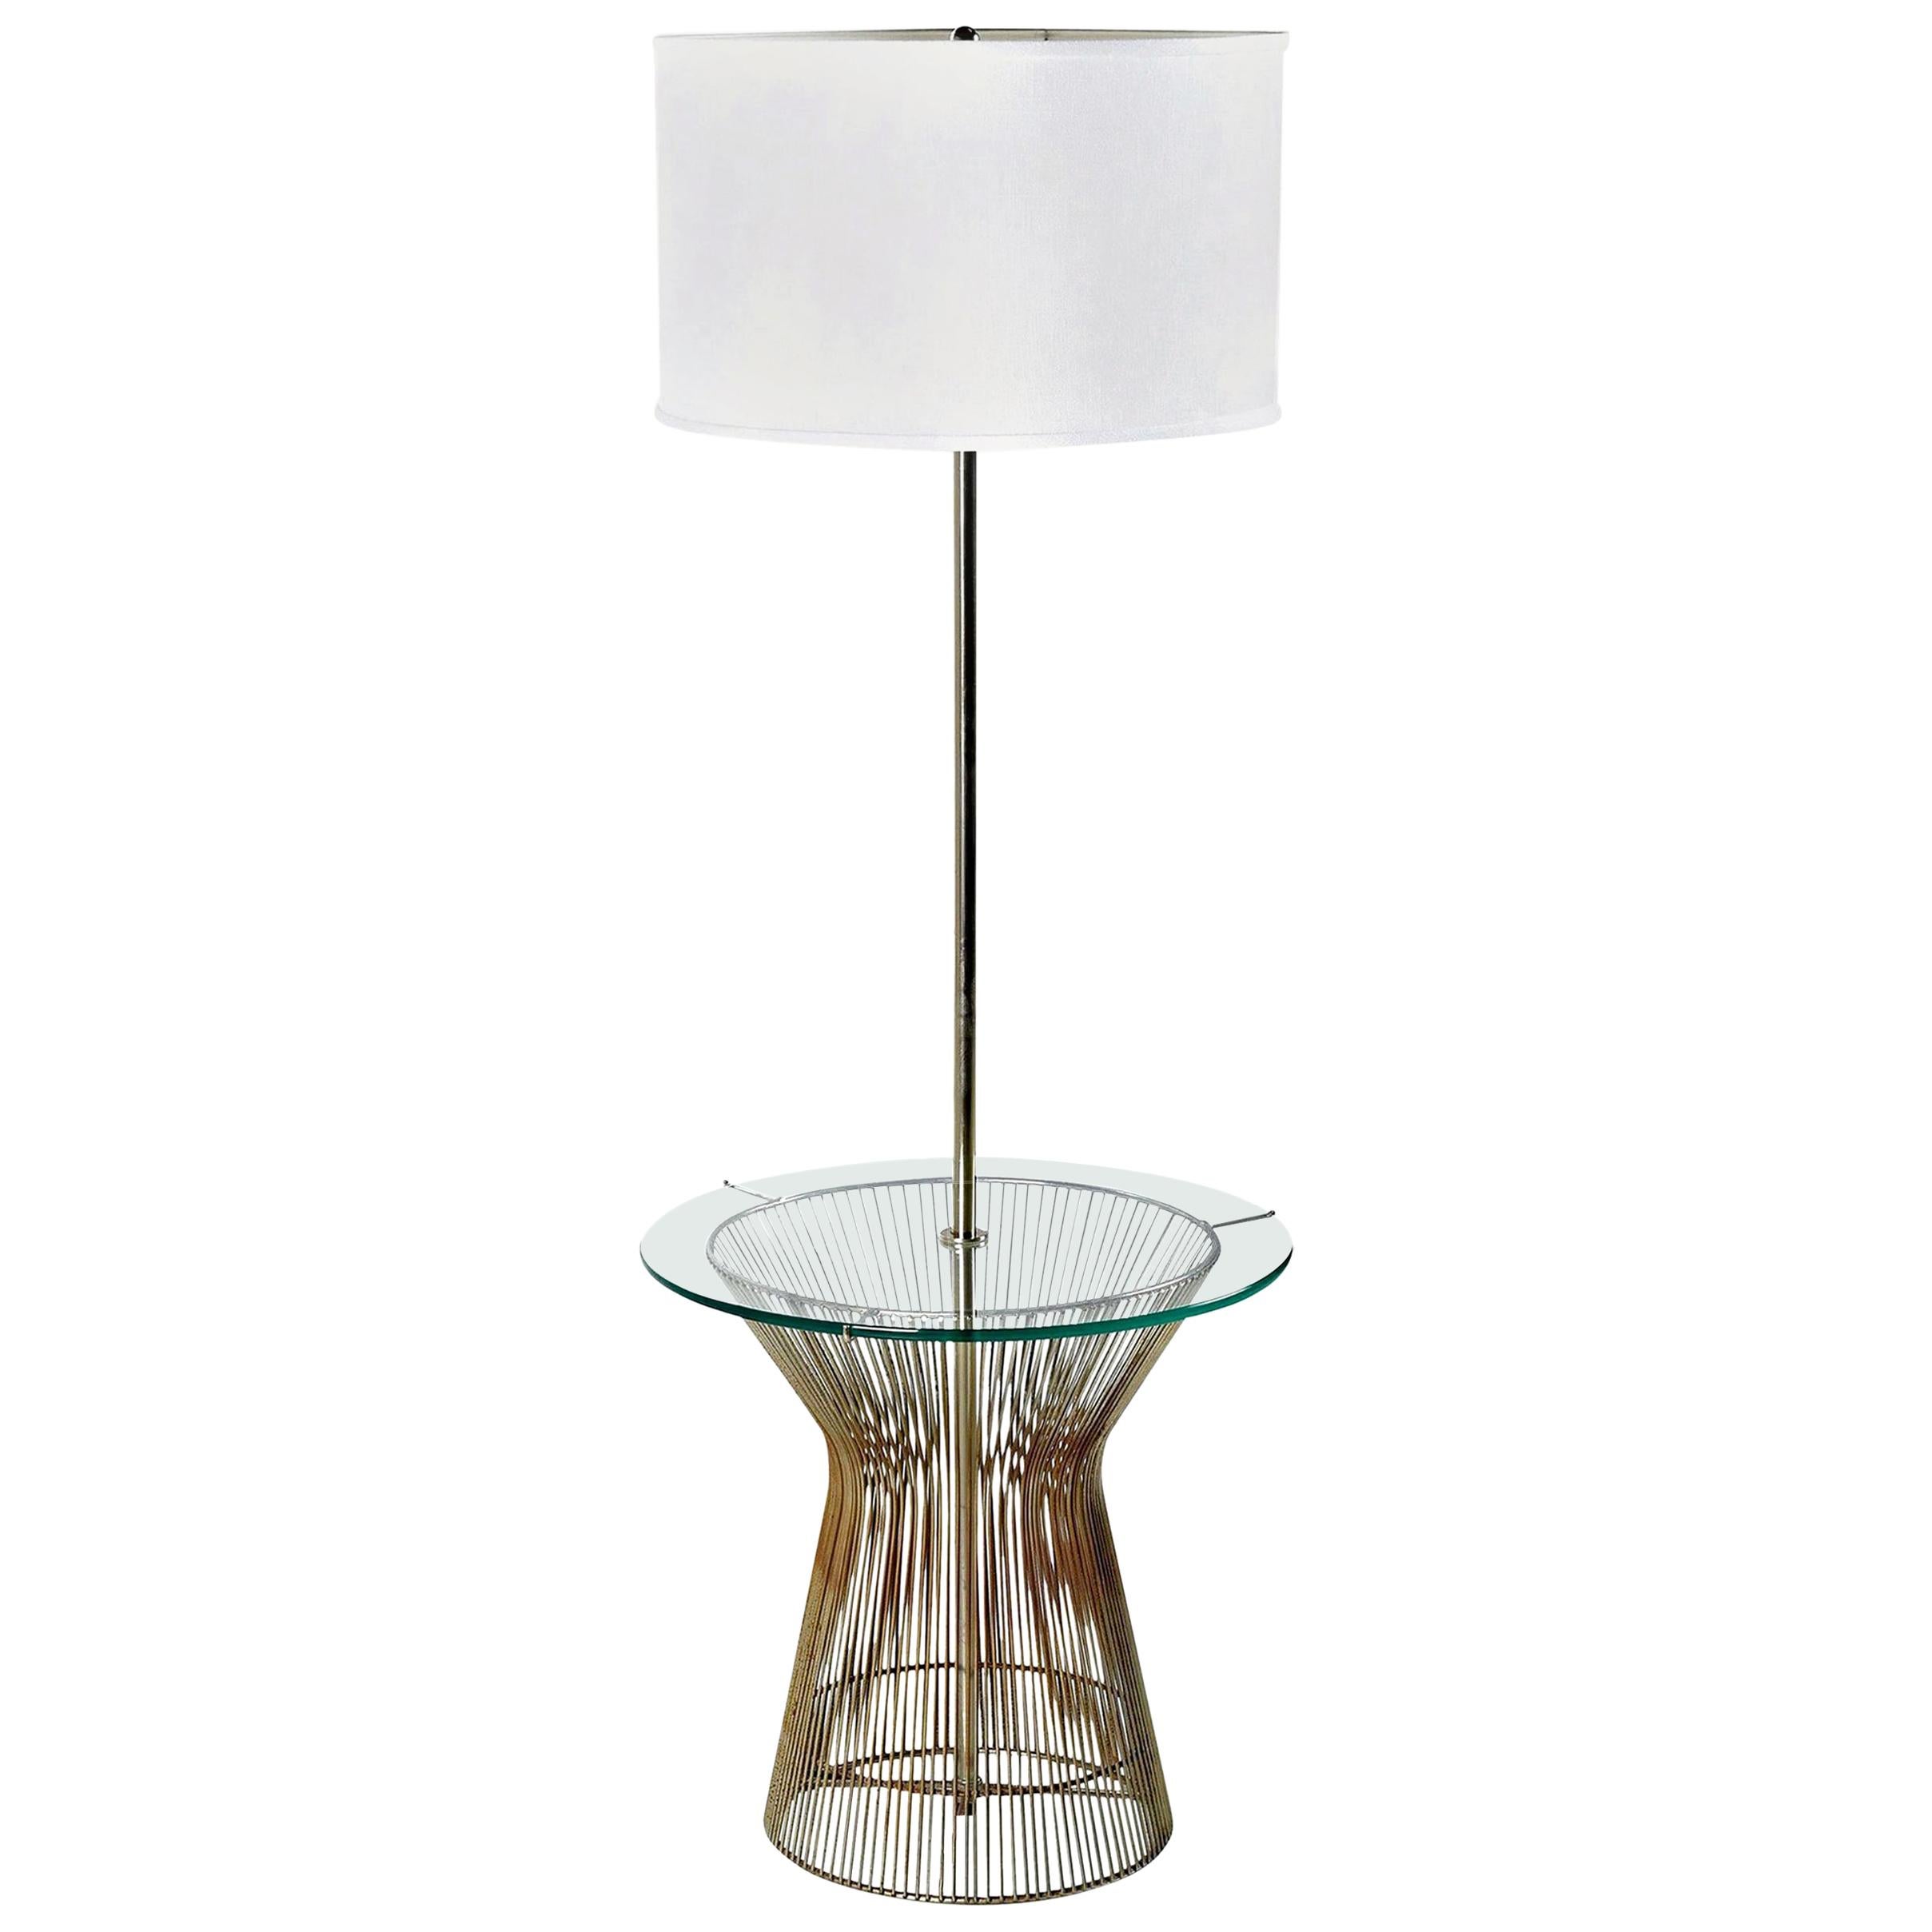 Warren Platner Style Metal Wire and Glass Table Lamp